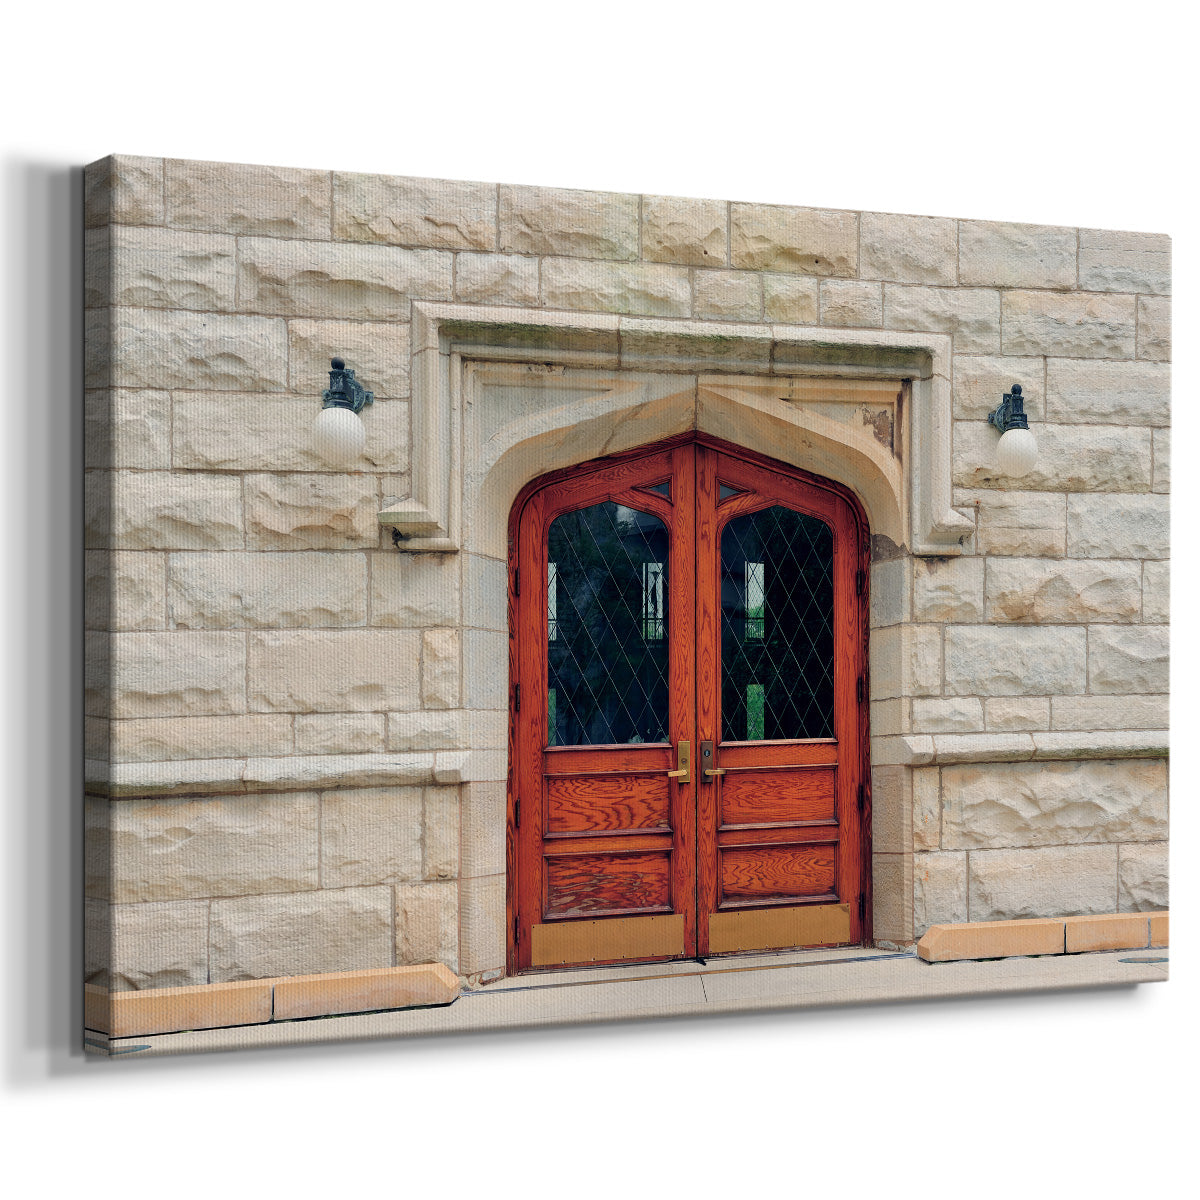 Chicago Watertower Doors - Gallery Wrapped Canvas